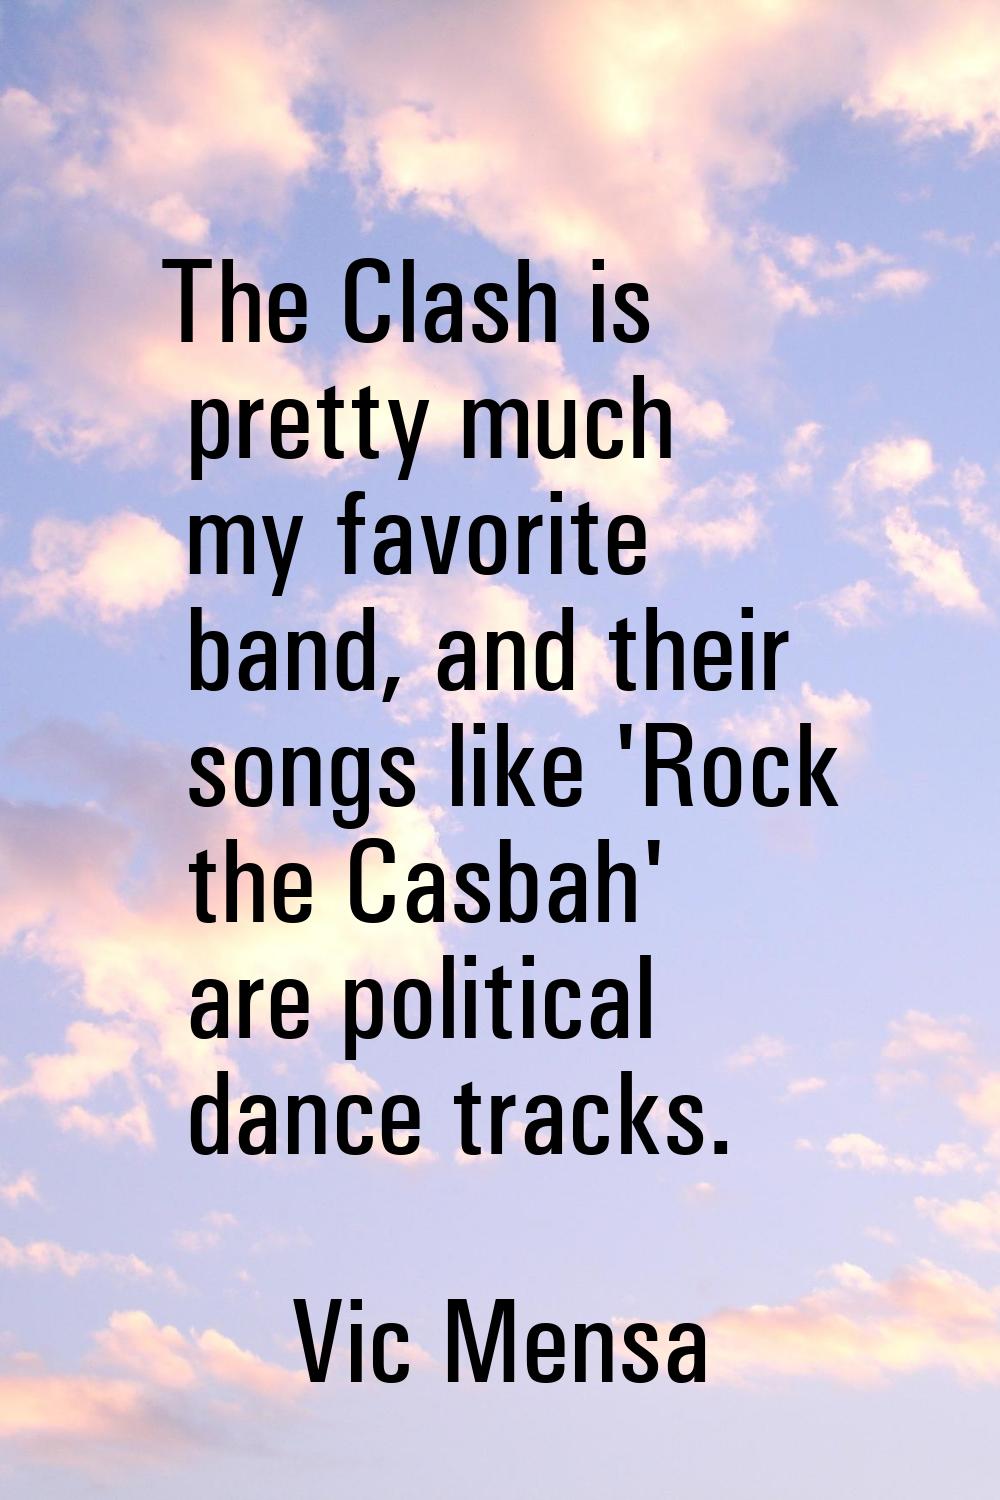 The Clash is pretty much my favorite band, and their songs like 'Rock the Casbah' are political dan